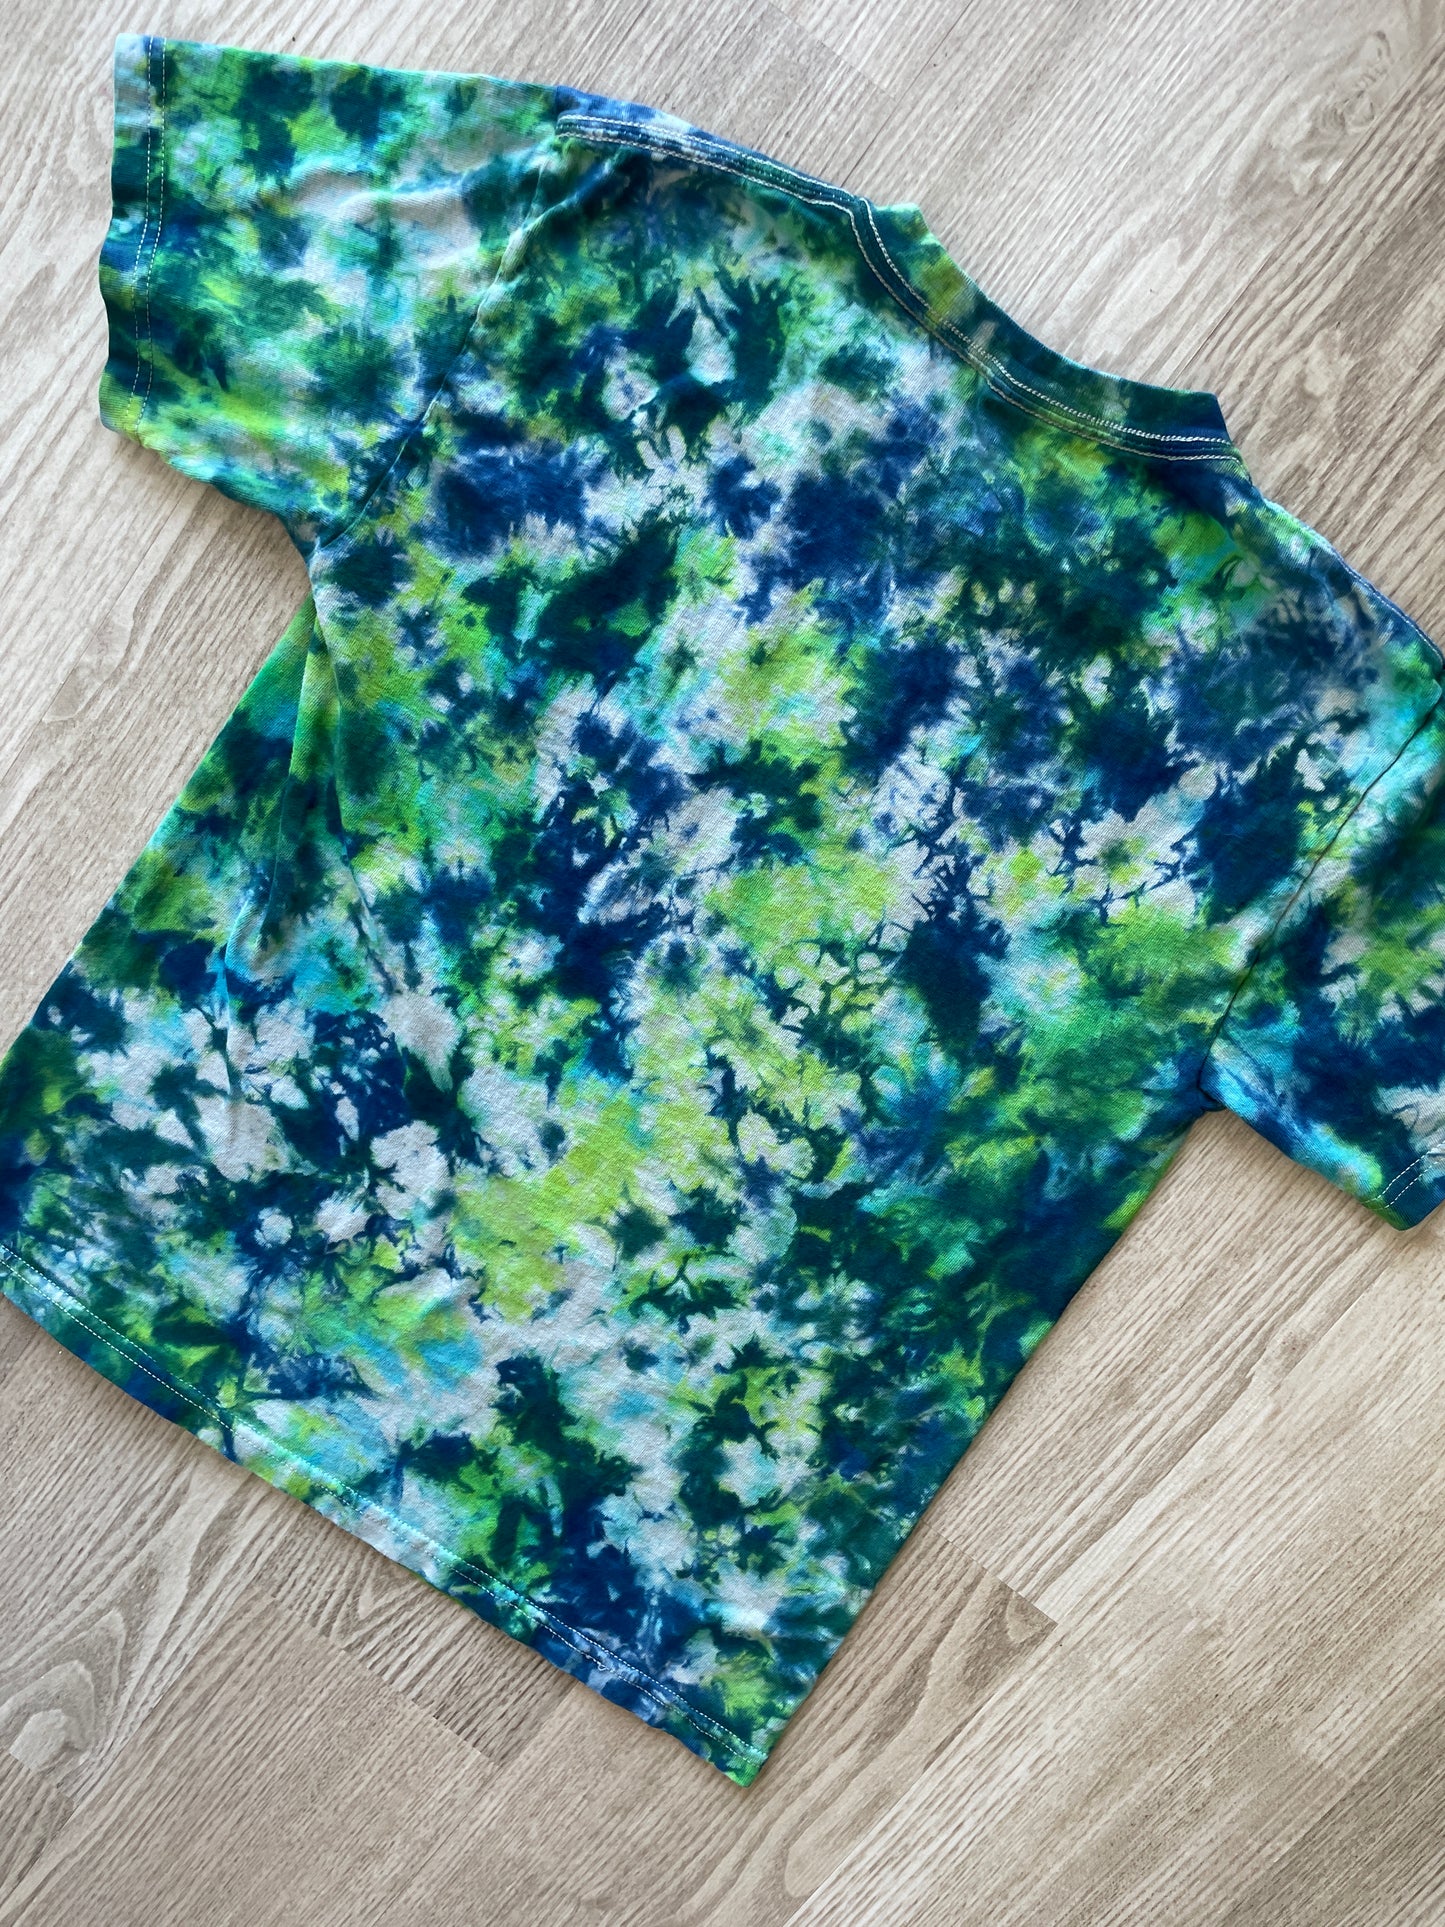 YOUTH LARGE T-REX Handmade Tie Dye T-Shirt | One-Of-a-Kind Green and Blue Short Sleeve